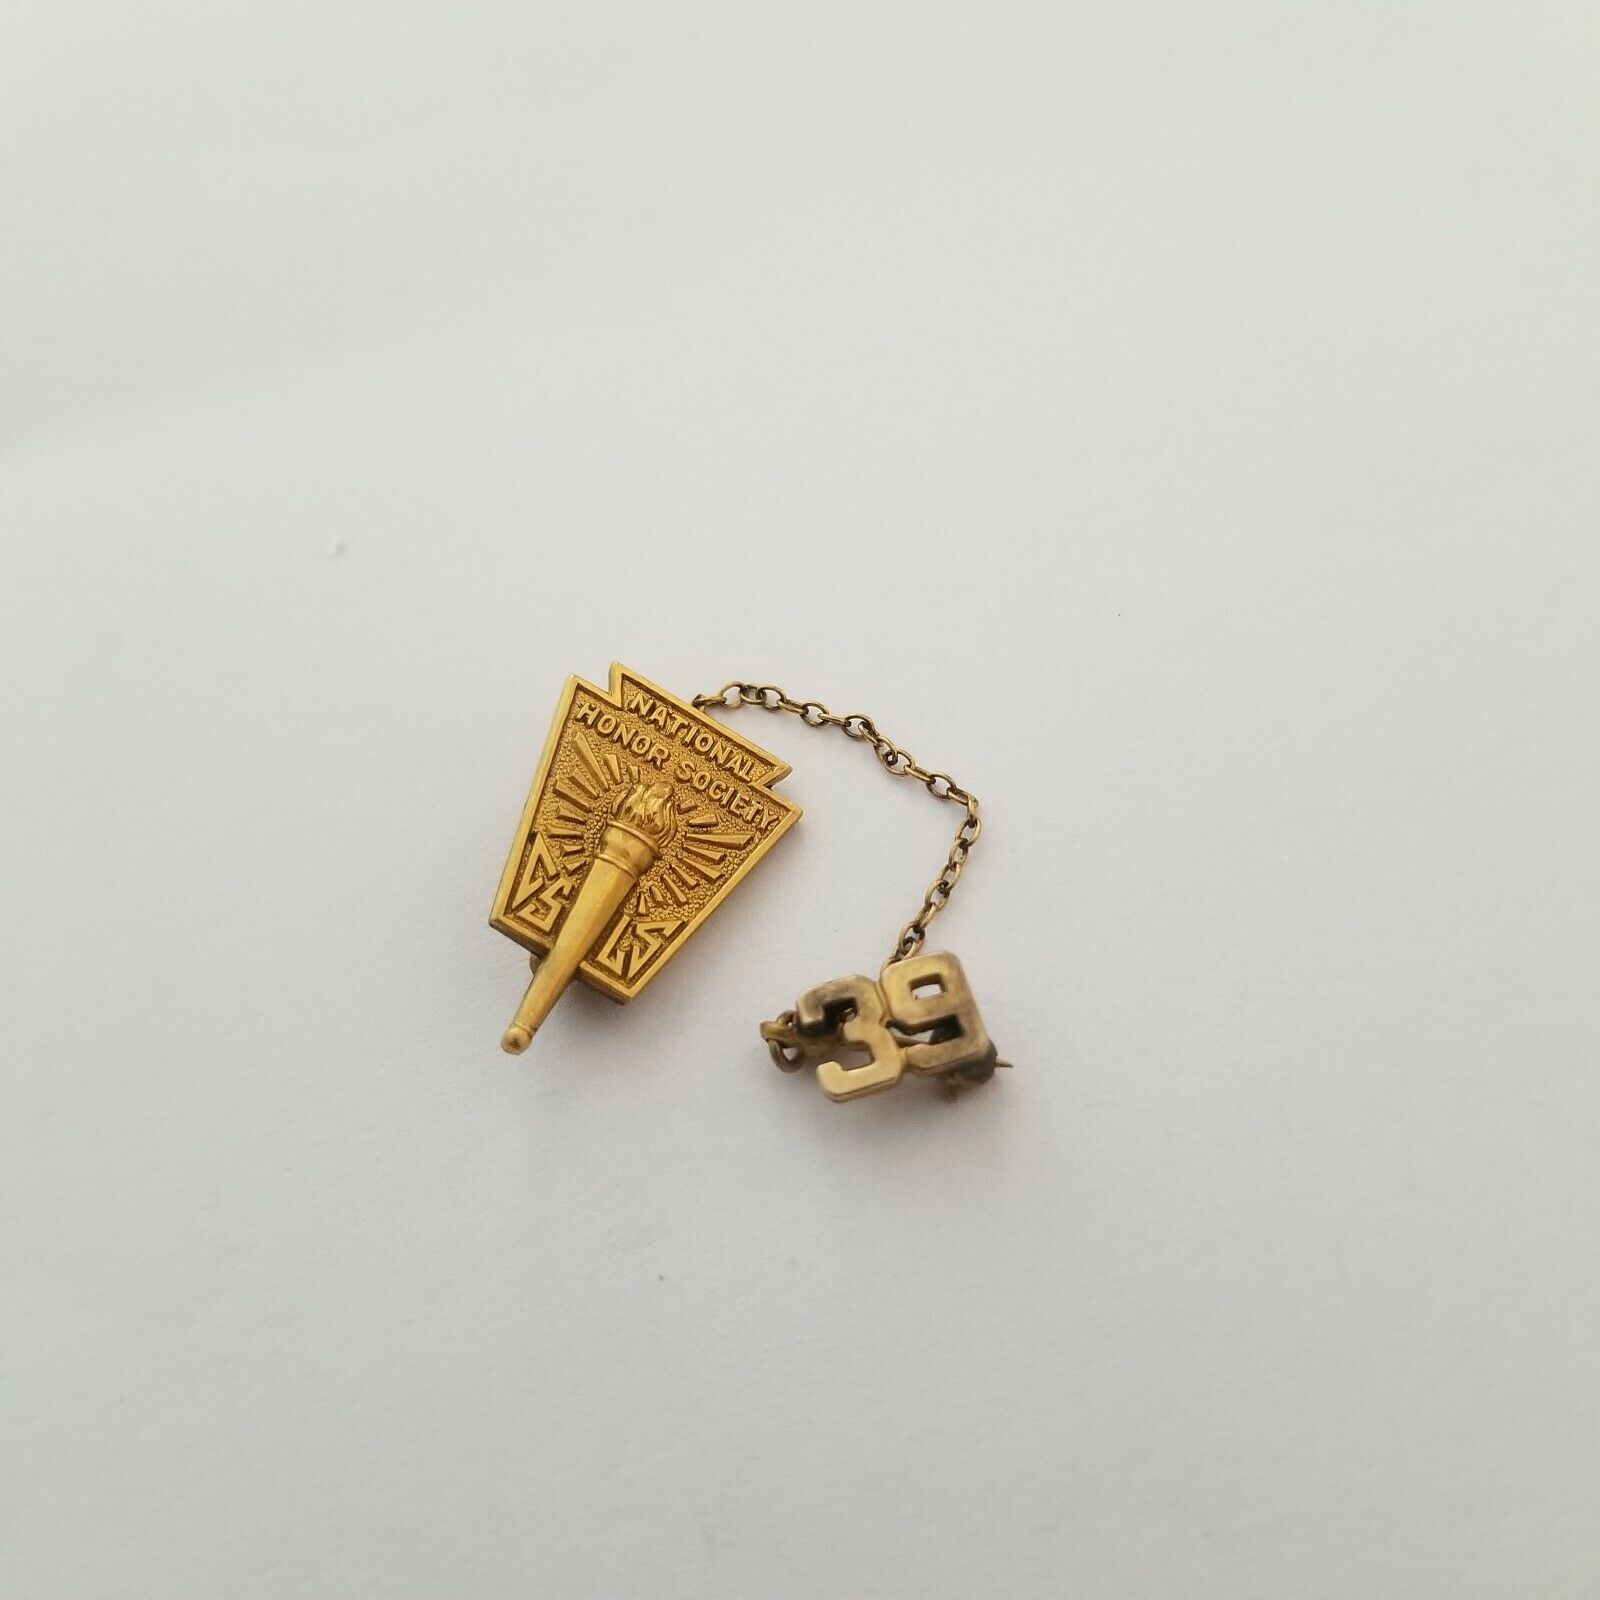 Vtg 1939 10k Gold Filled National Honor Society Lapel Pin Stamped Straight Pin